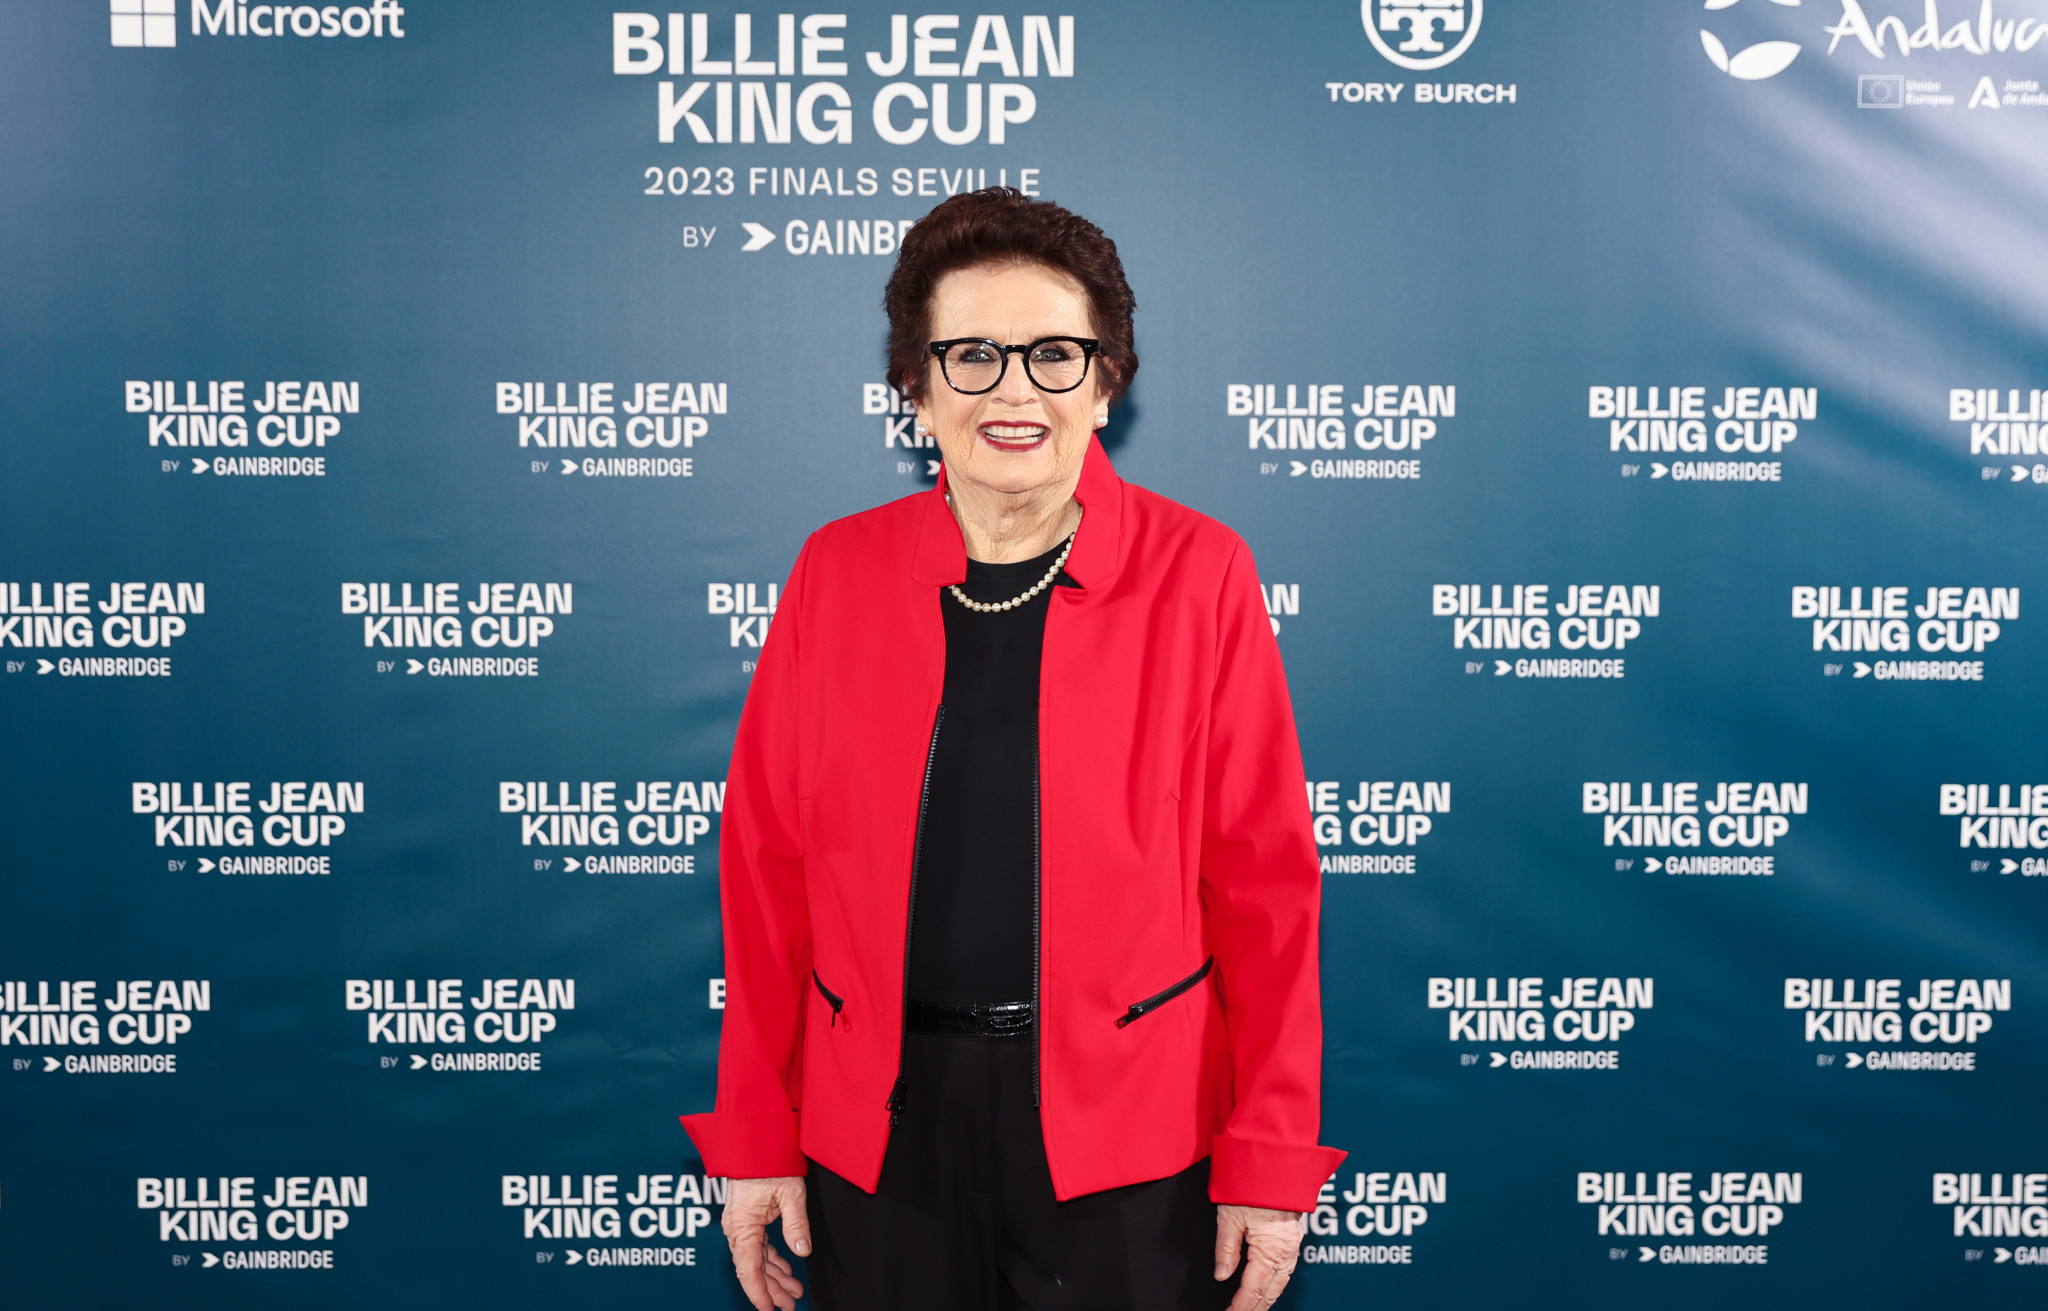 The iconic Billie Jean King will take centre stage in Seville. © Getty Images